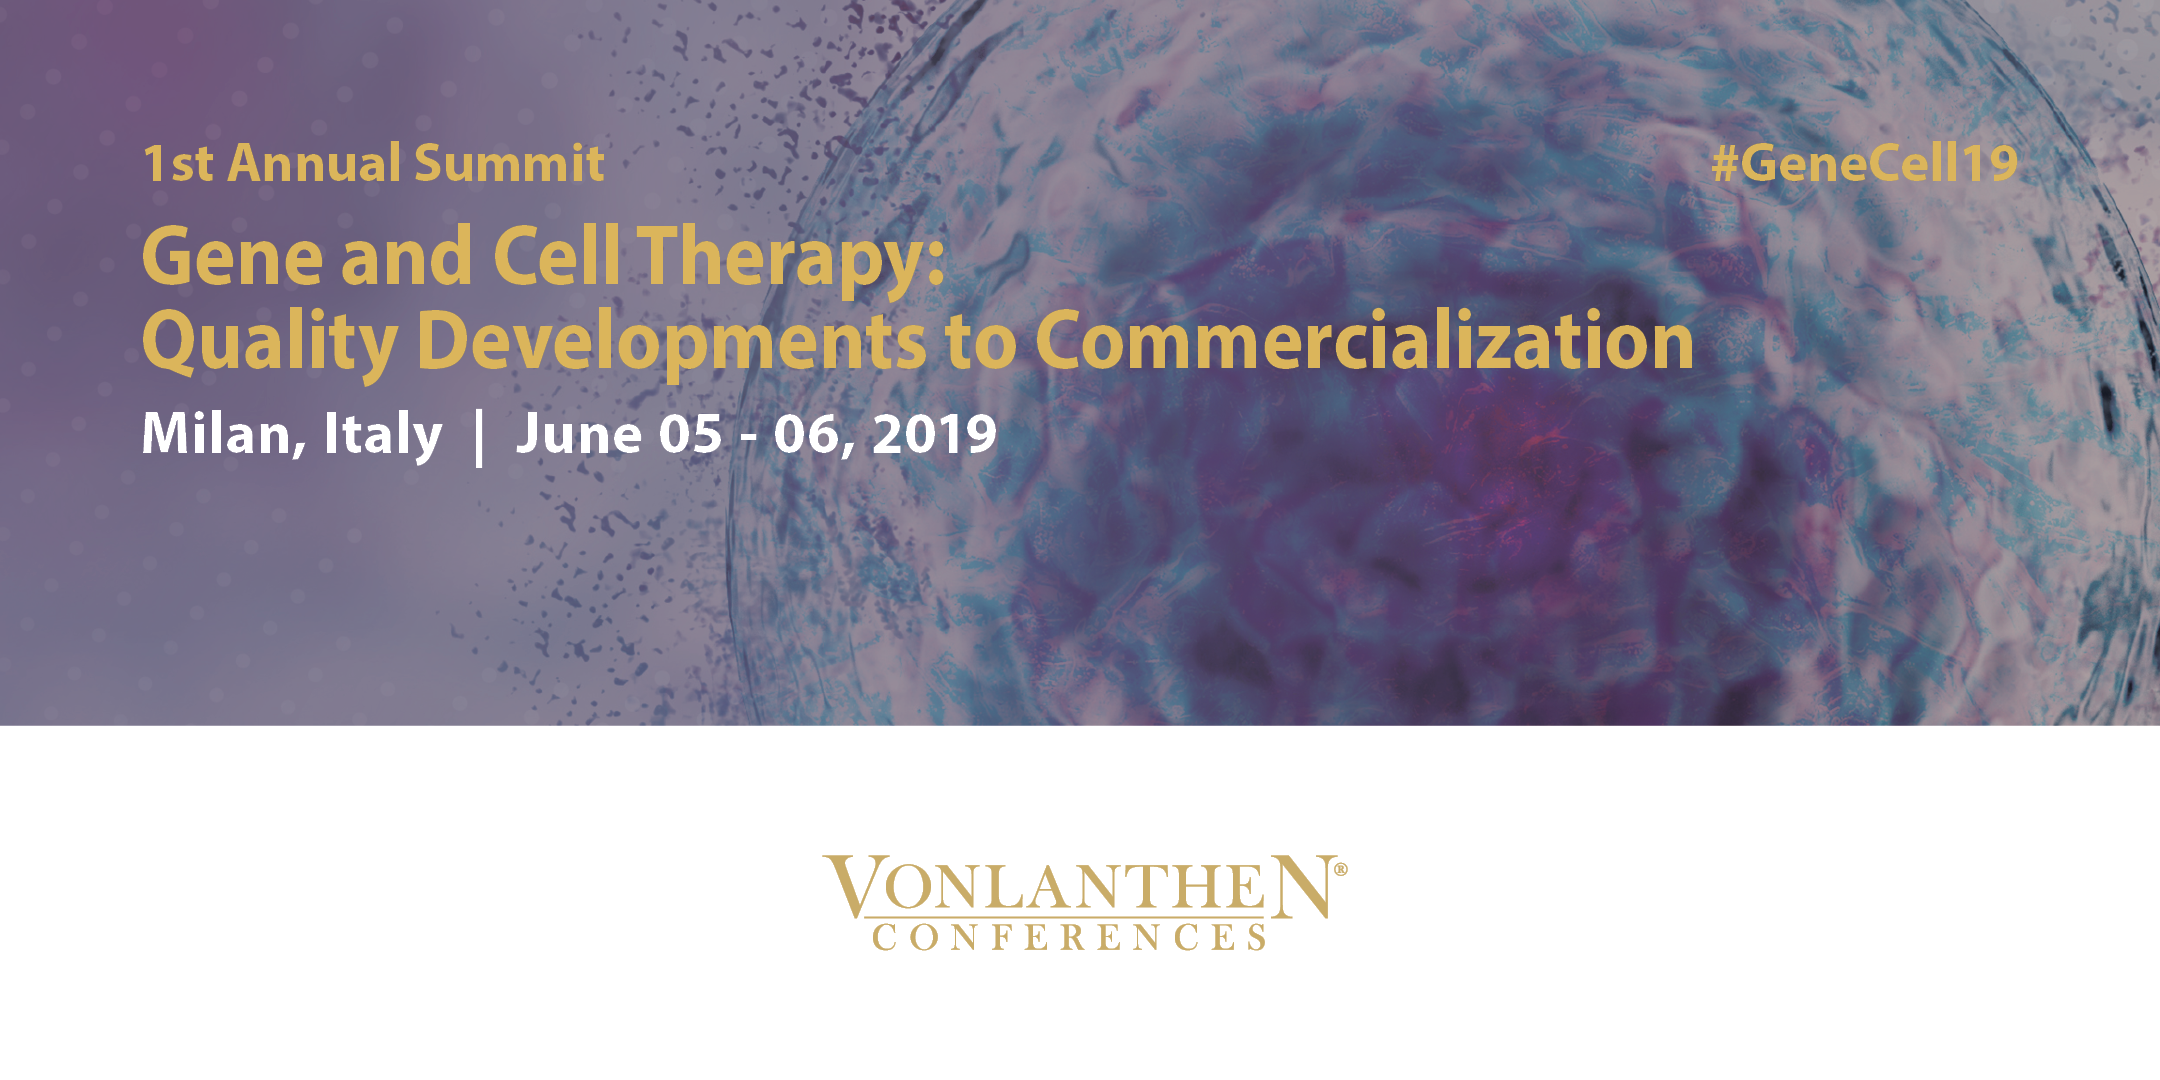 Gene and Cell Therapy: Quality Developments to Commercialization Summit